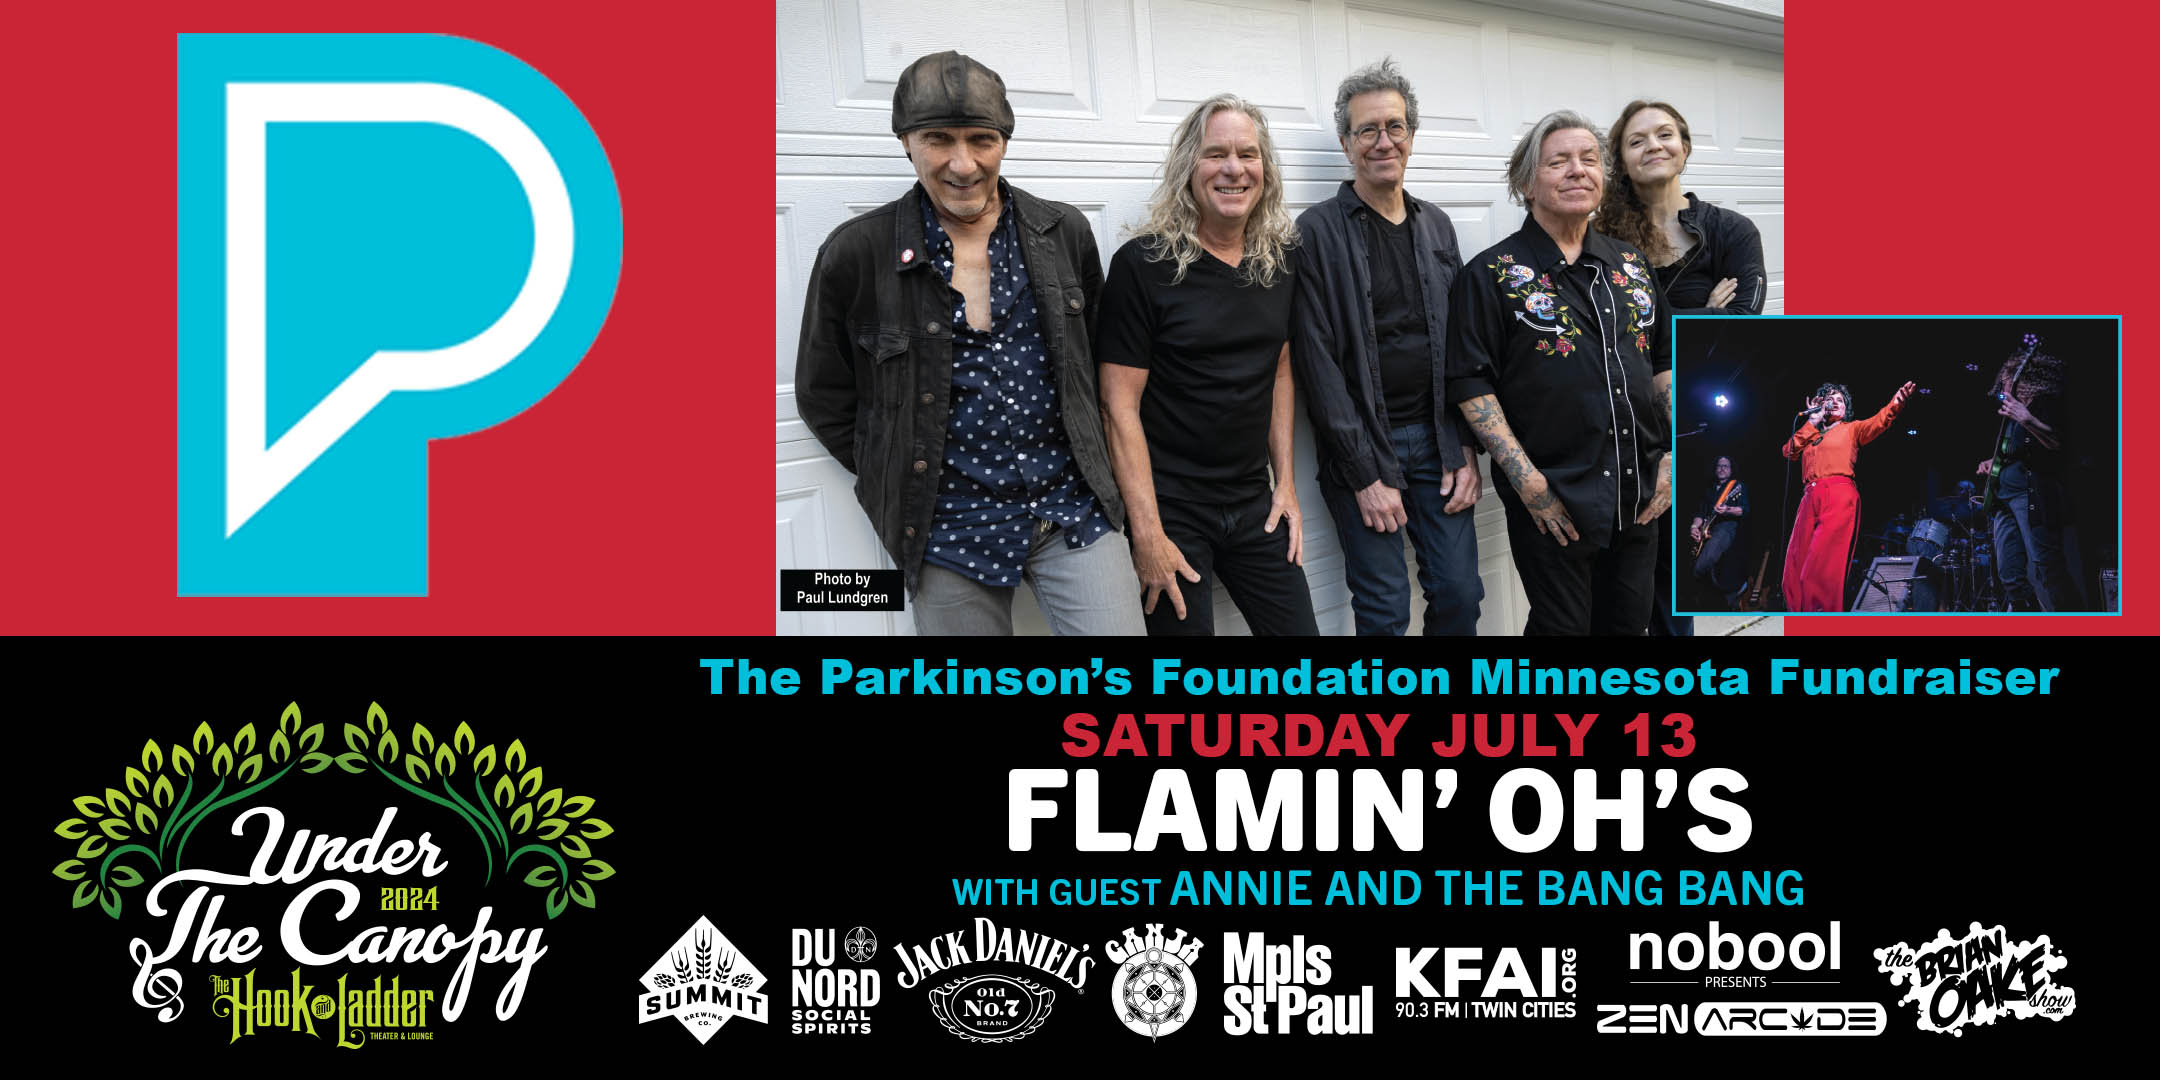 The Flamin’ Oh’s with guest Annie and the Bang Bang The Parkinson’s Foundation Minnesota Fundraiser Saturday, July 13 Under The Canopy at The Hook and Ladder Theater "An Urban Outdoor Summer Concert Series" Doors 6:00pm :: Music 7:00pm :: 21+ GA: $25 ADV / $35 DOS